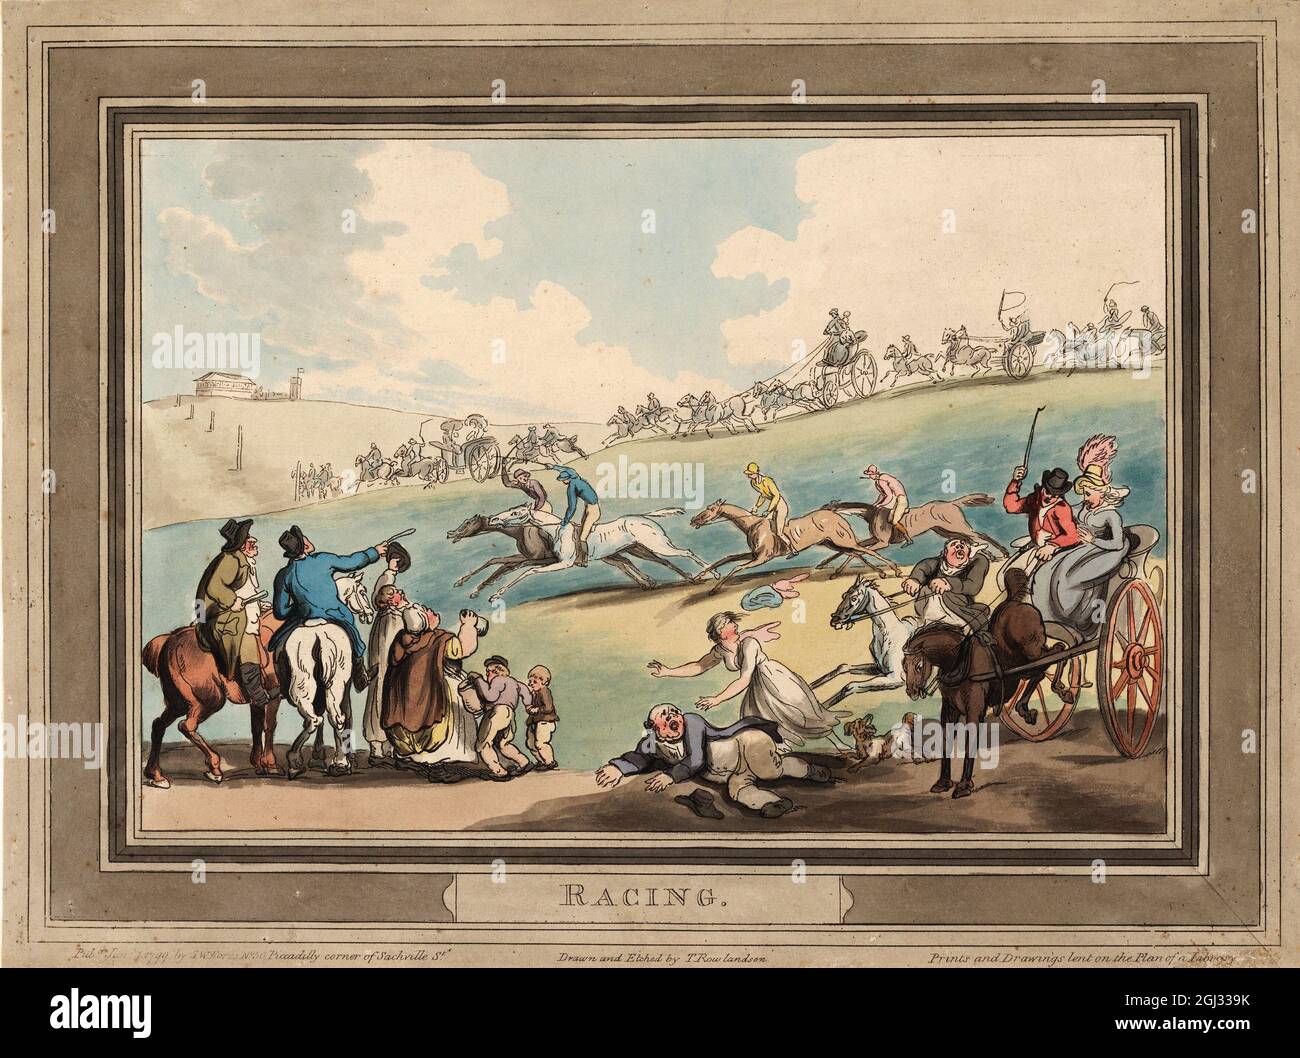 Racing 1799 Artist: Thomas Rowlandson (1756-1827) an English artist and caricaturist of the Georgian Era. A social observer, he was a prolific artist and print maker.  Credit: Thomas Rowlandson/Alamy Stock Photo